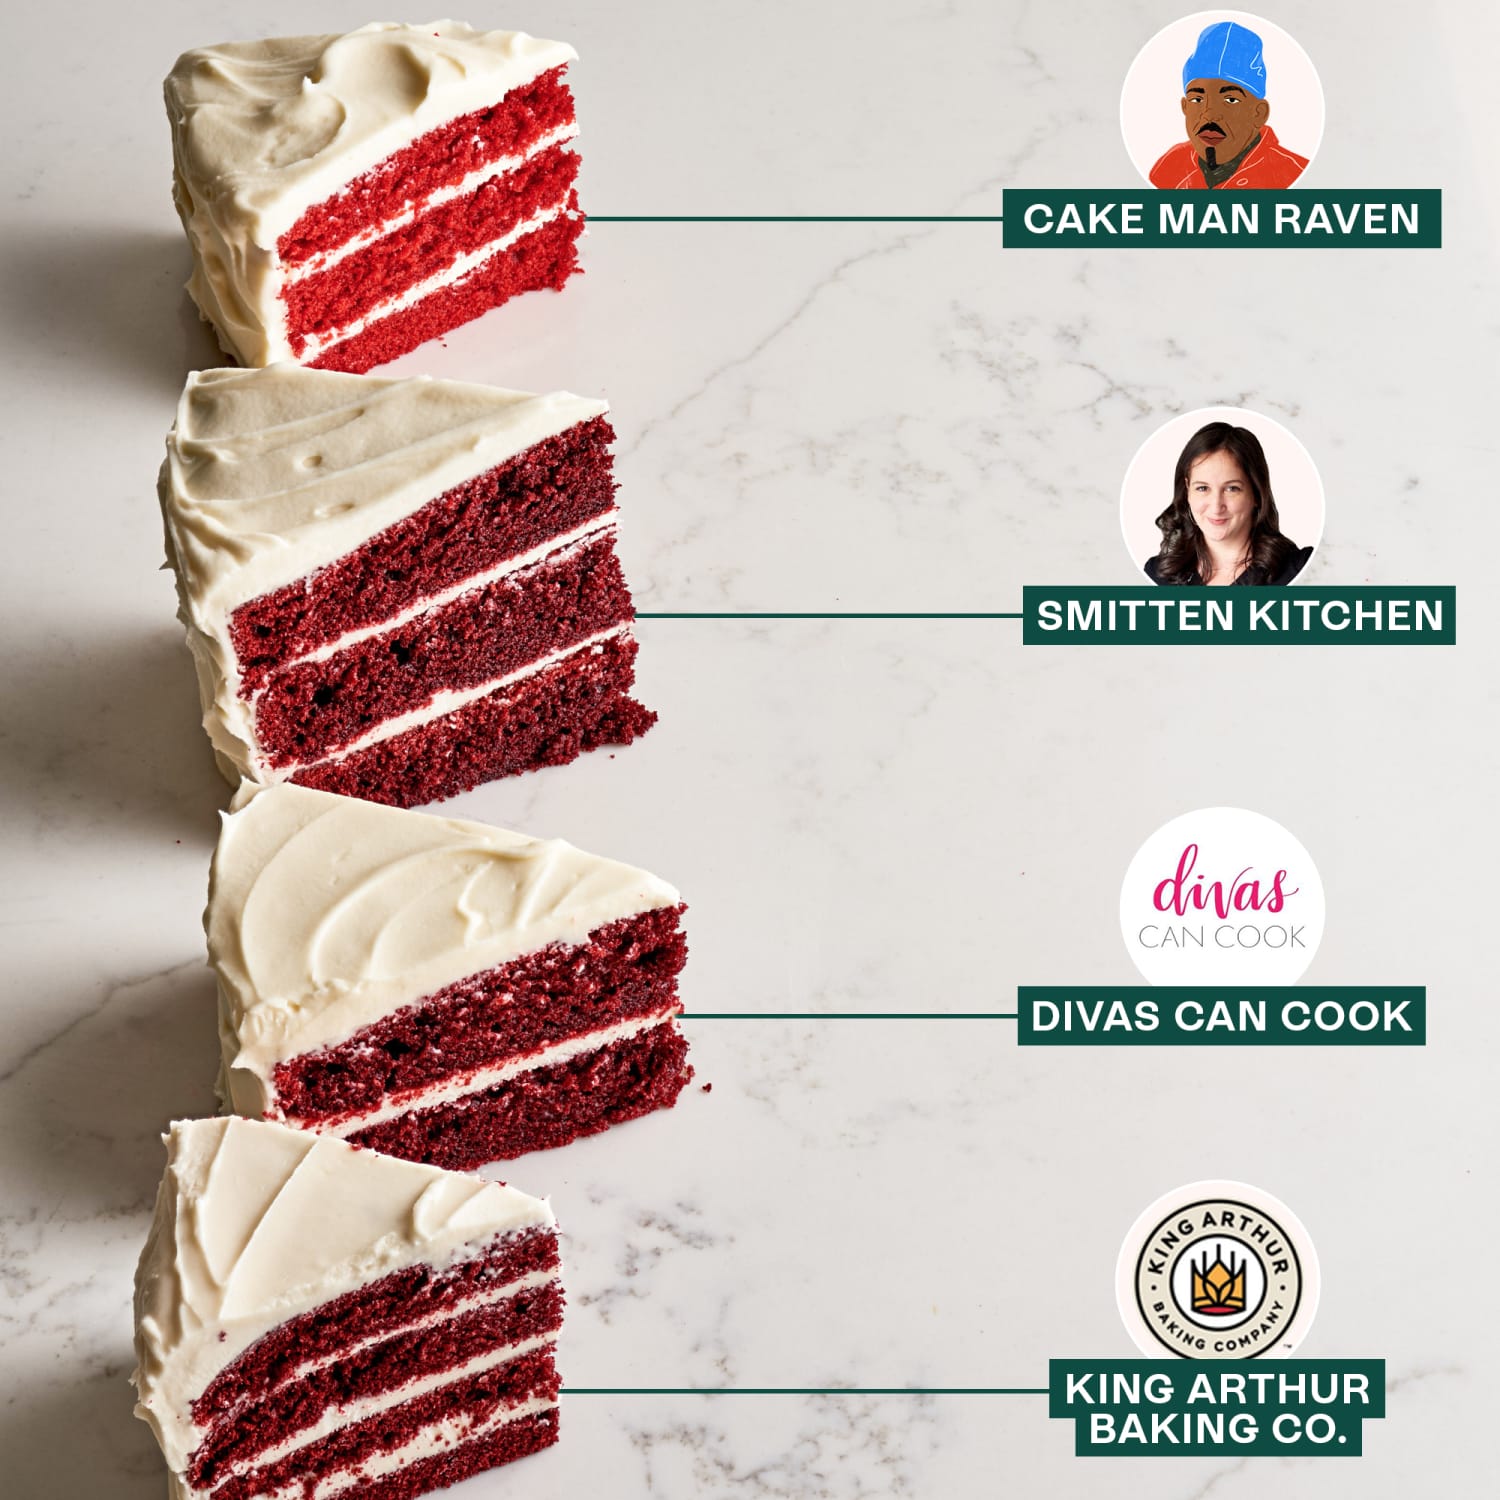 I Tried Four Popular Red Velvet Cake Recipes and Found the Best ...